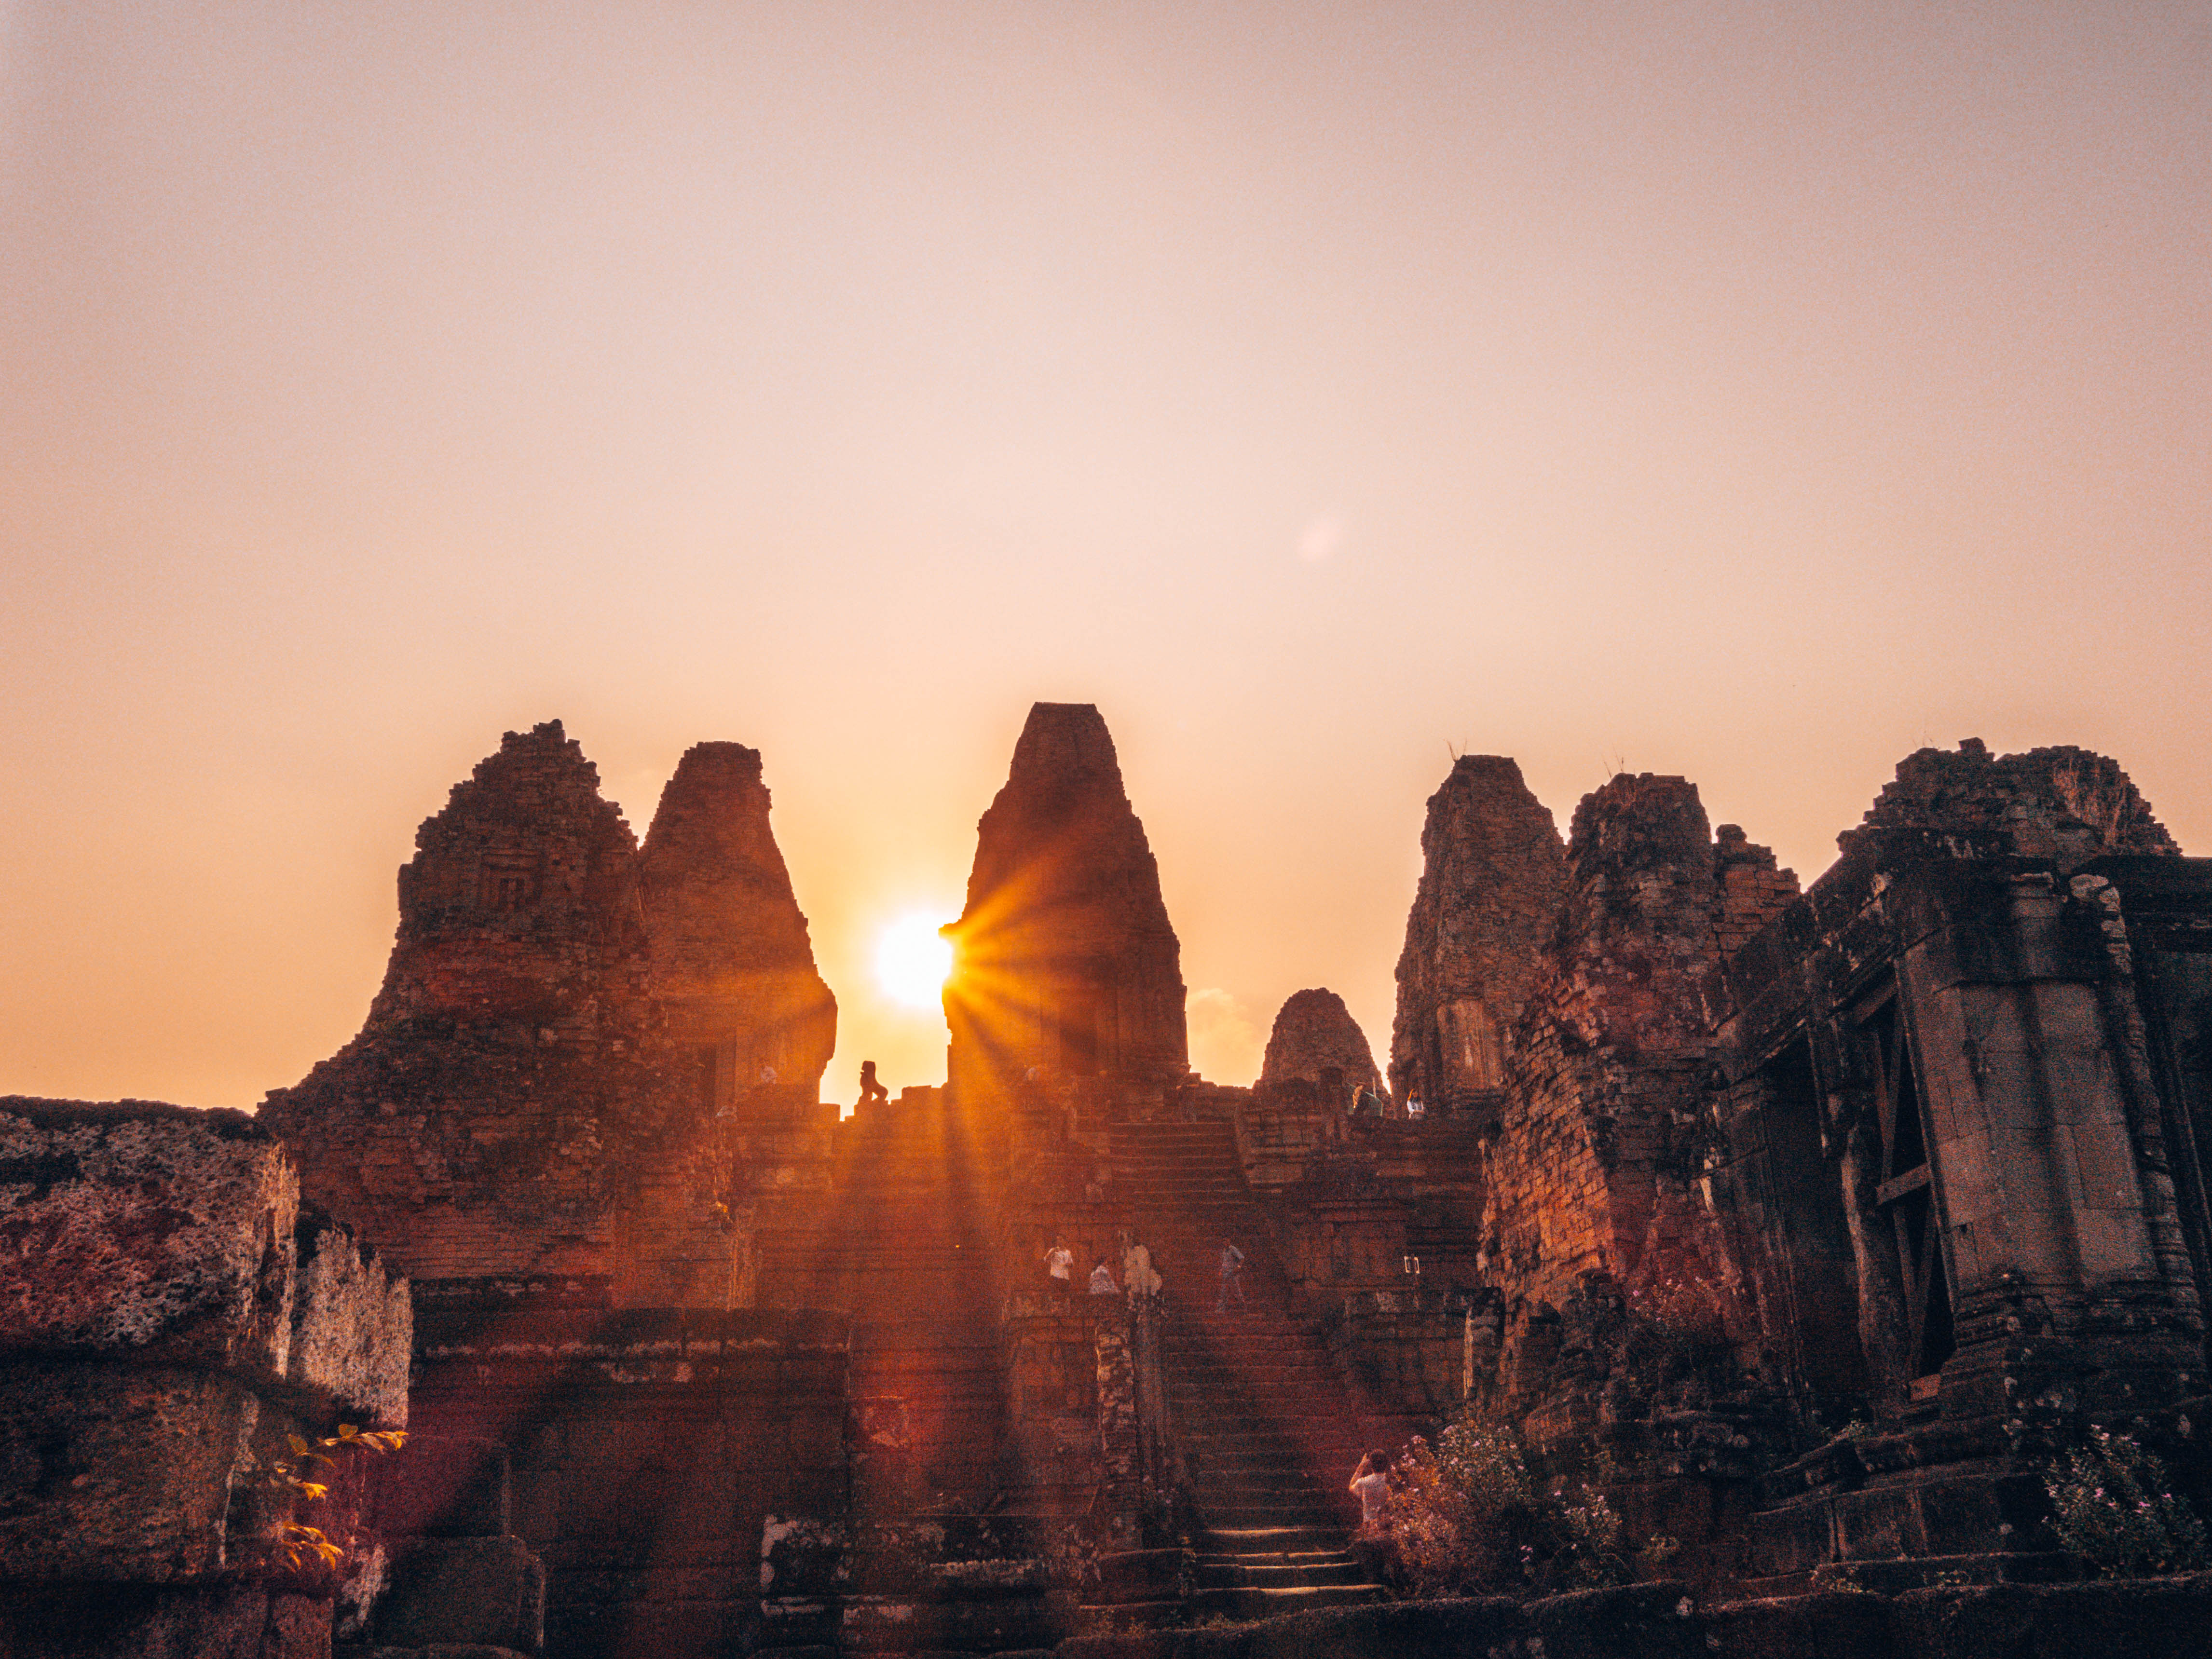 An off-the-beaten-path guide to Siem Reap, Cambodia